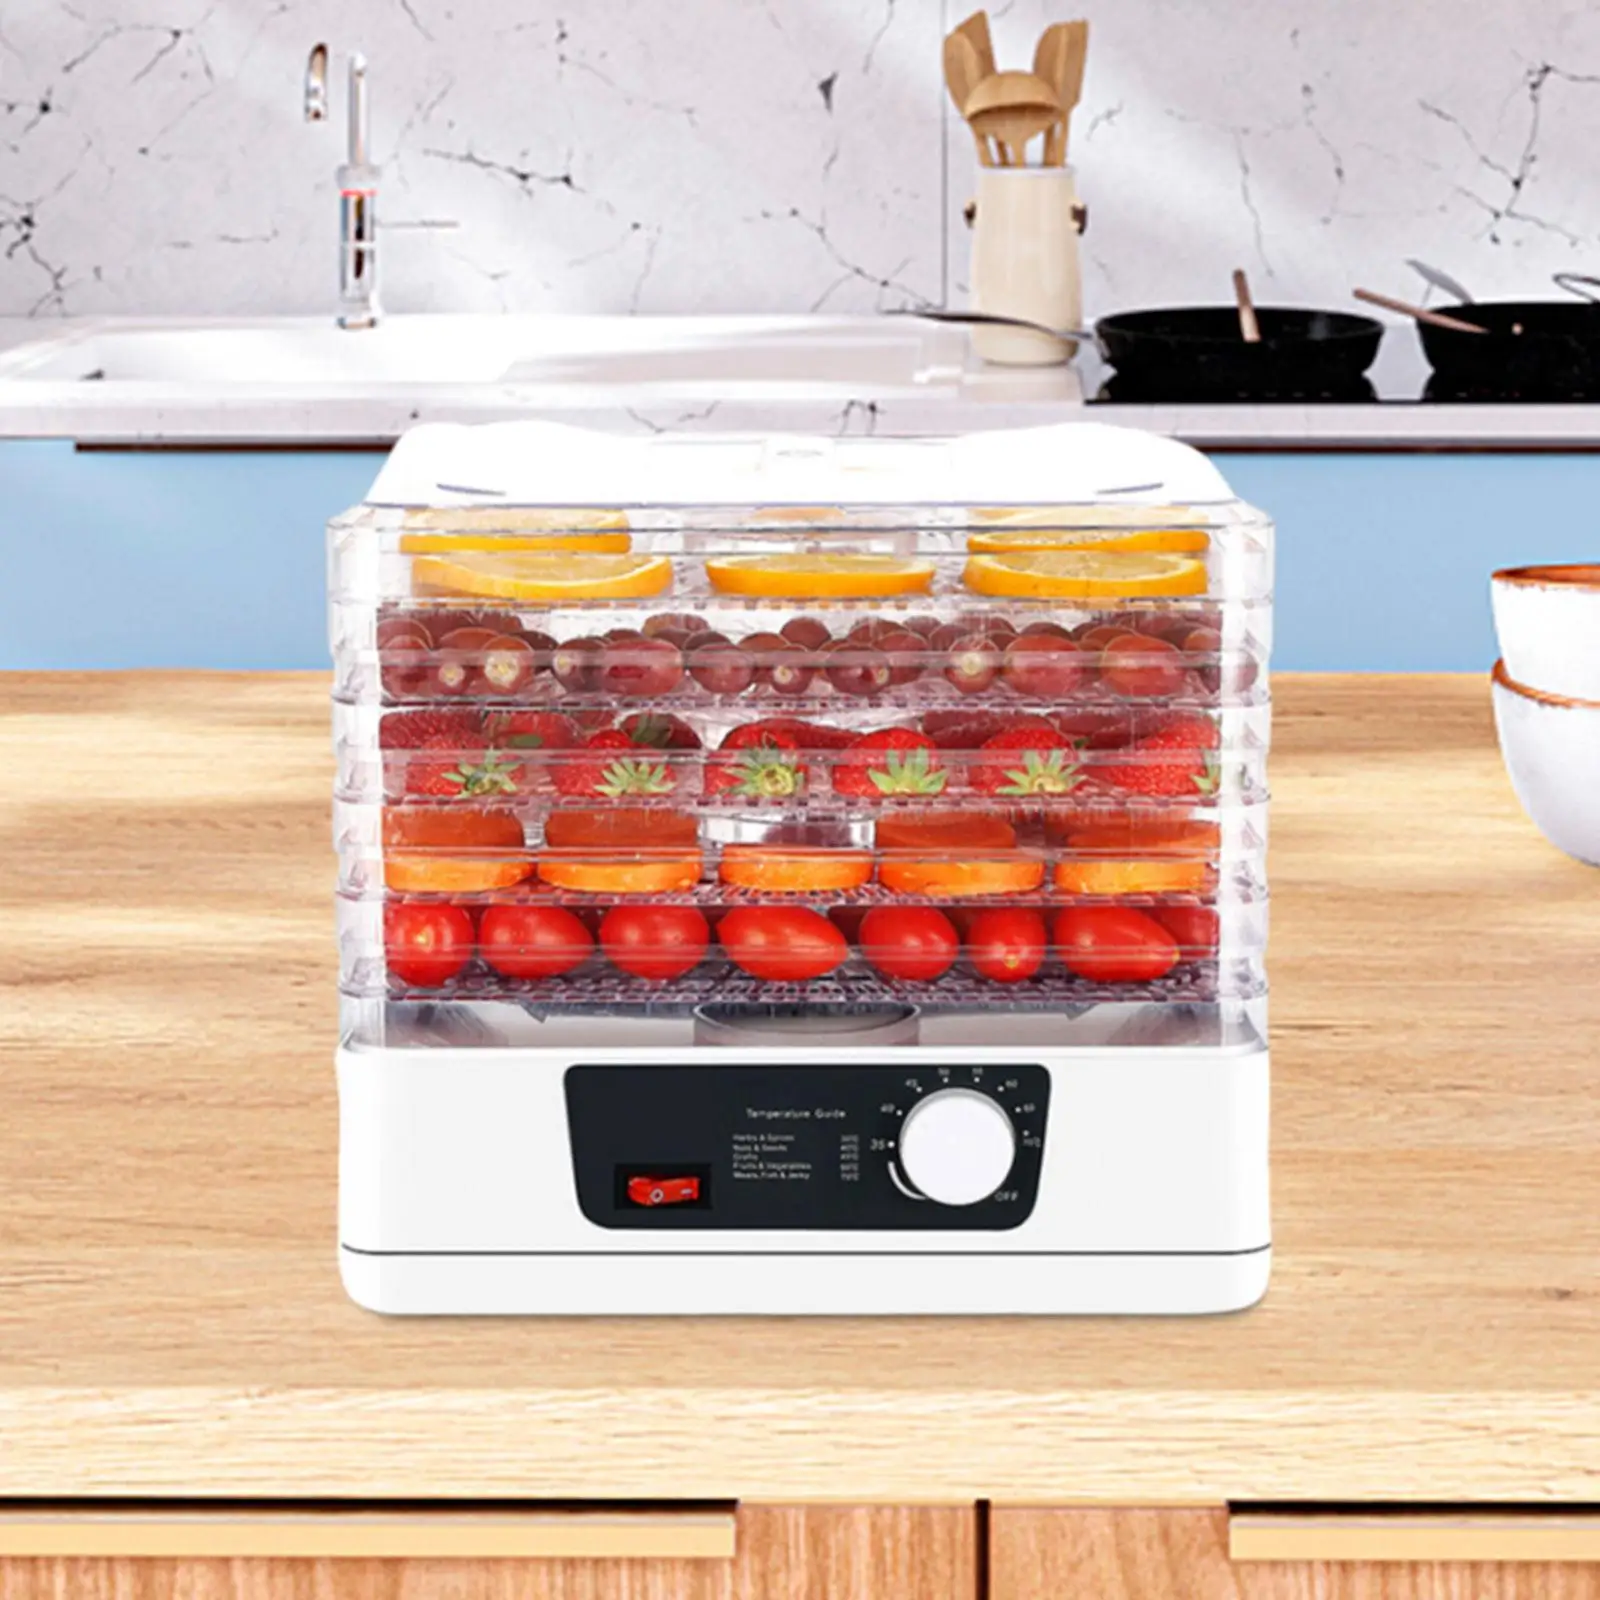 Fruit Dryer 5 Layers 110V 350W Durable Dryer Machine Adjustable Temperature Dried Machine Food Fruit Dryer Machine for Vegetable